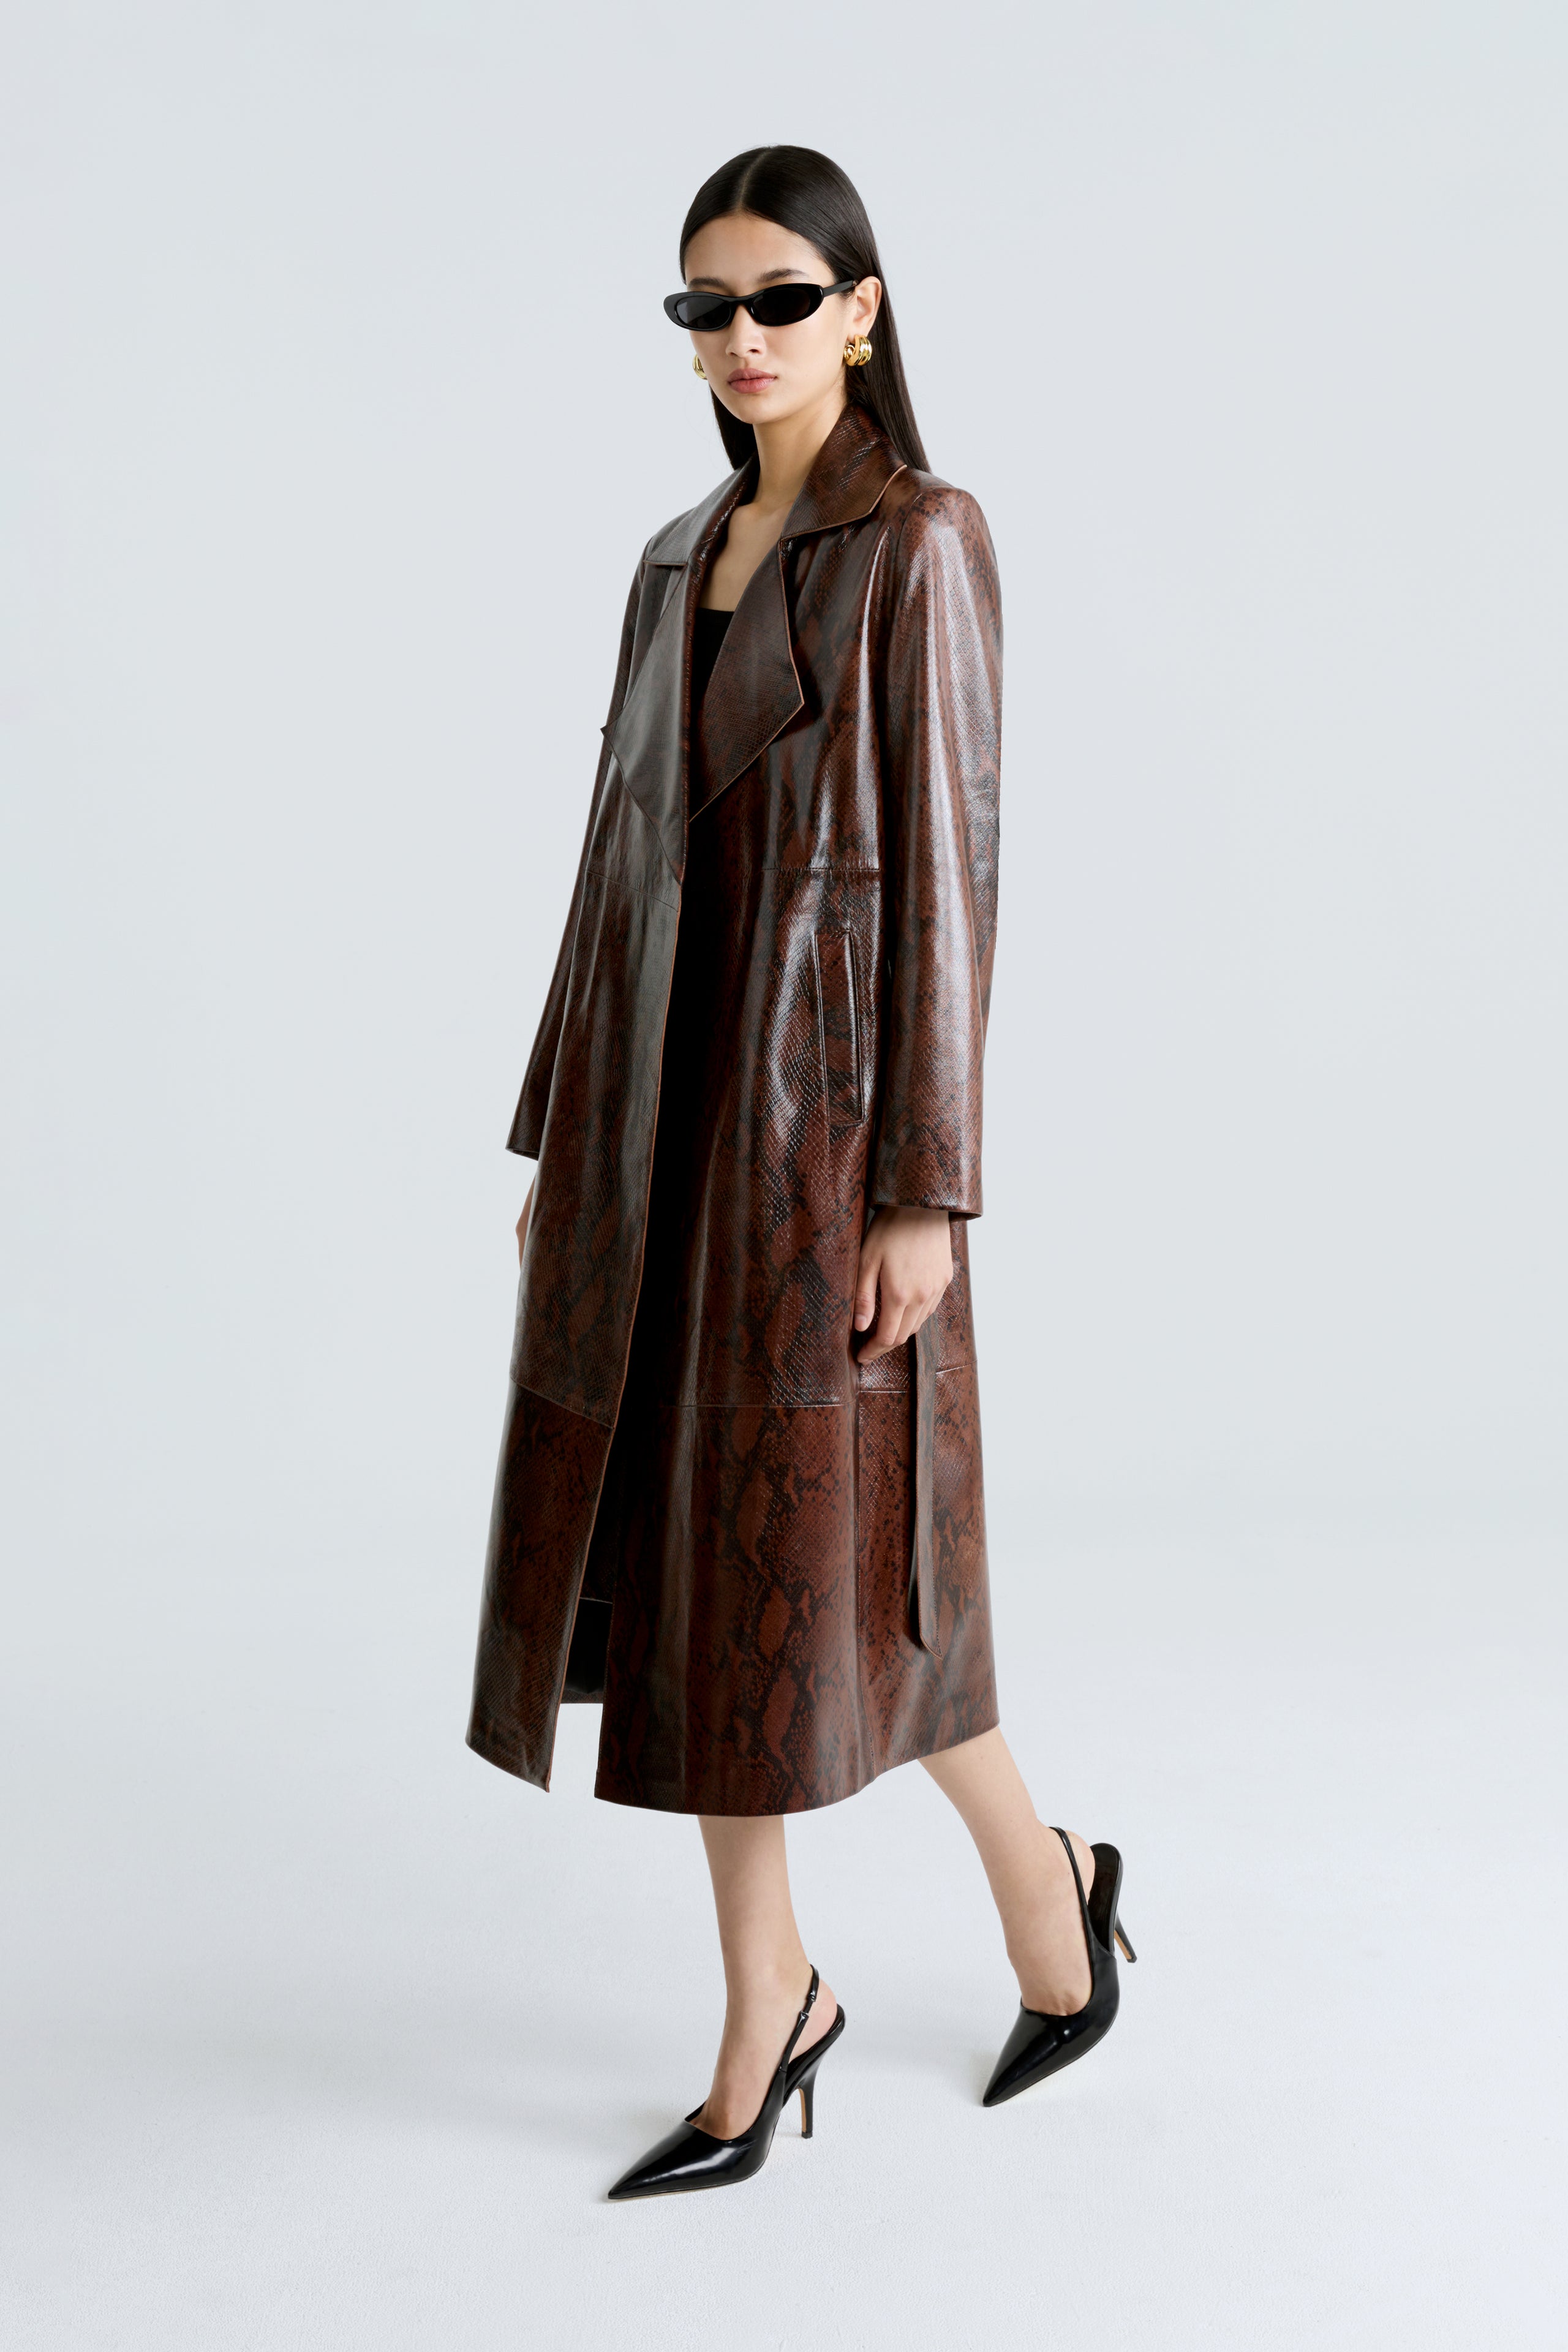 Model is wearing the Amina Python Belted Leather Coat Side